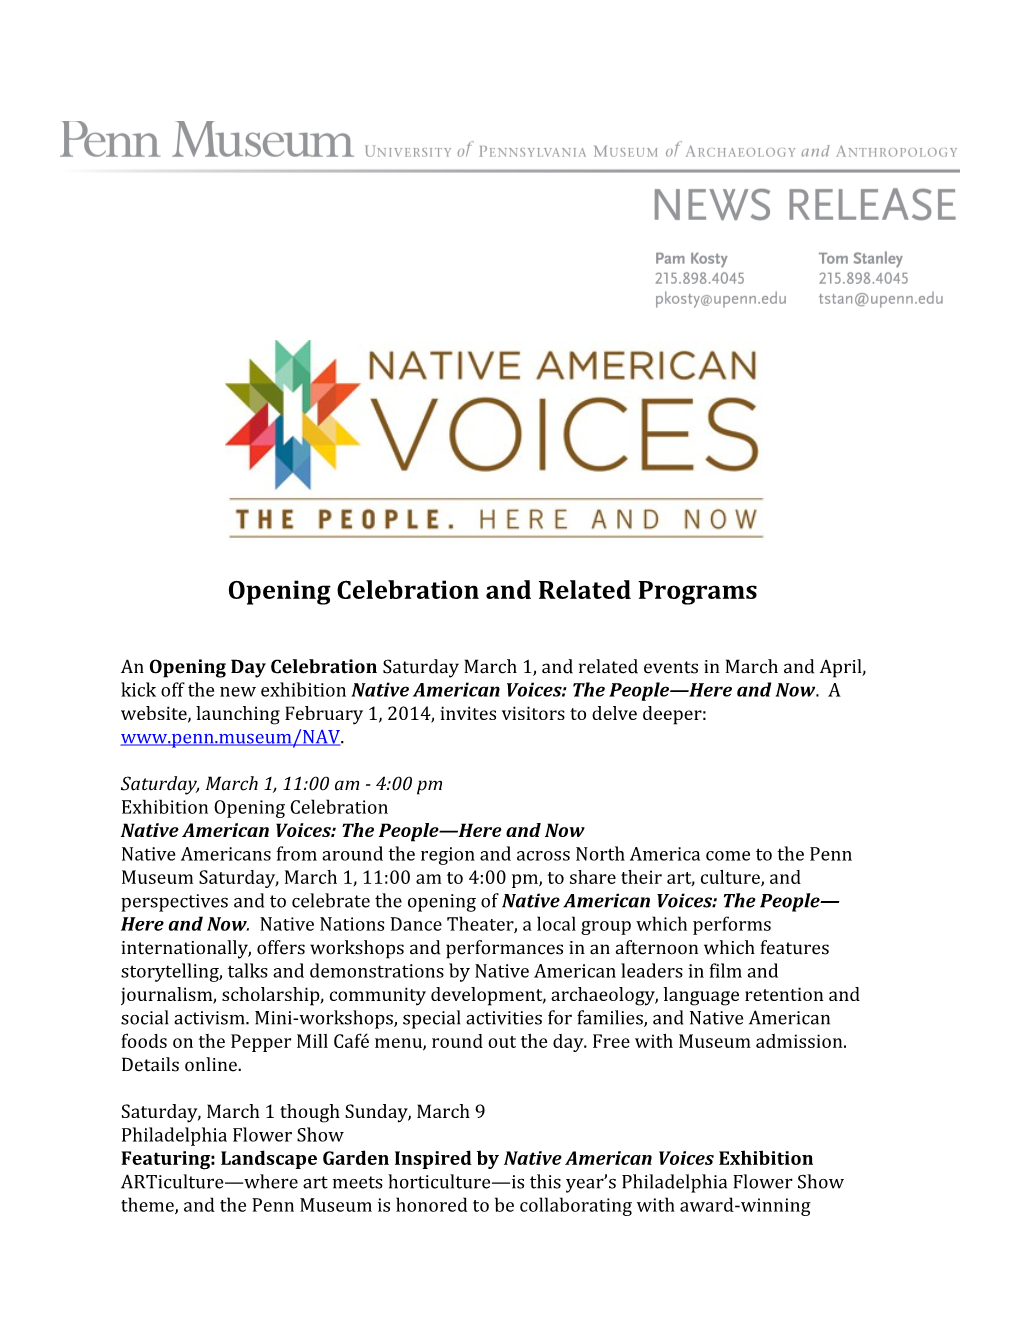 Opening Celebration and Related Programs